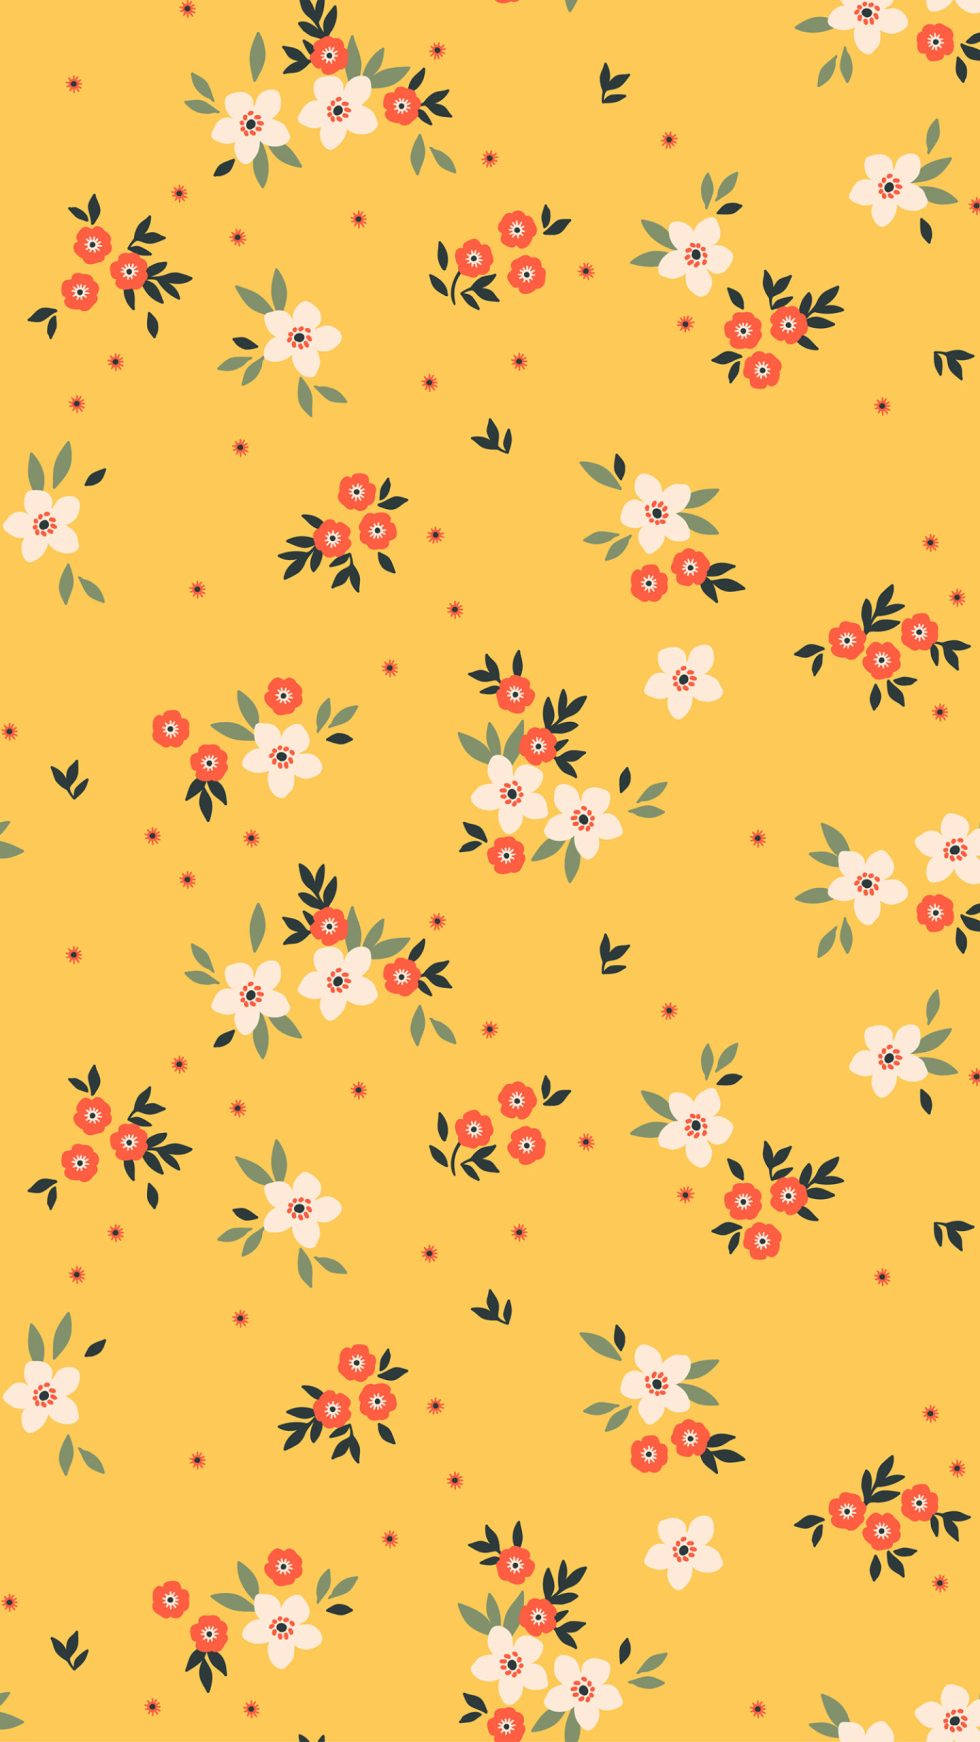 Bringing a cheerful touch to your day with this cute yellow aesthetic. Wallpaper